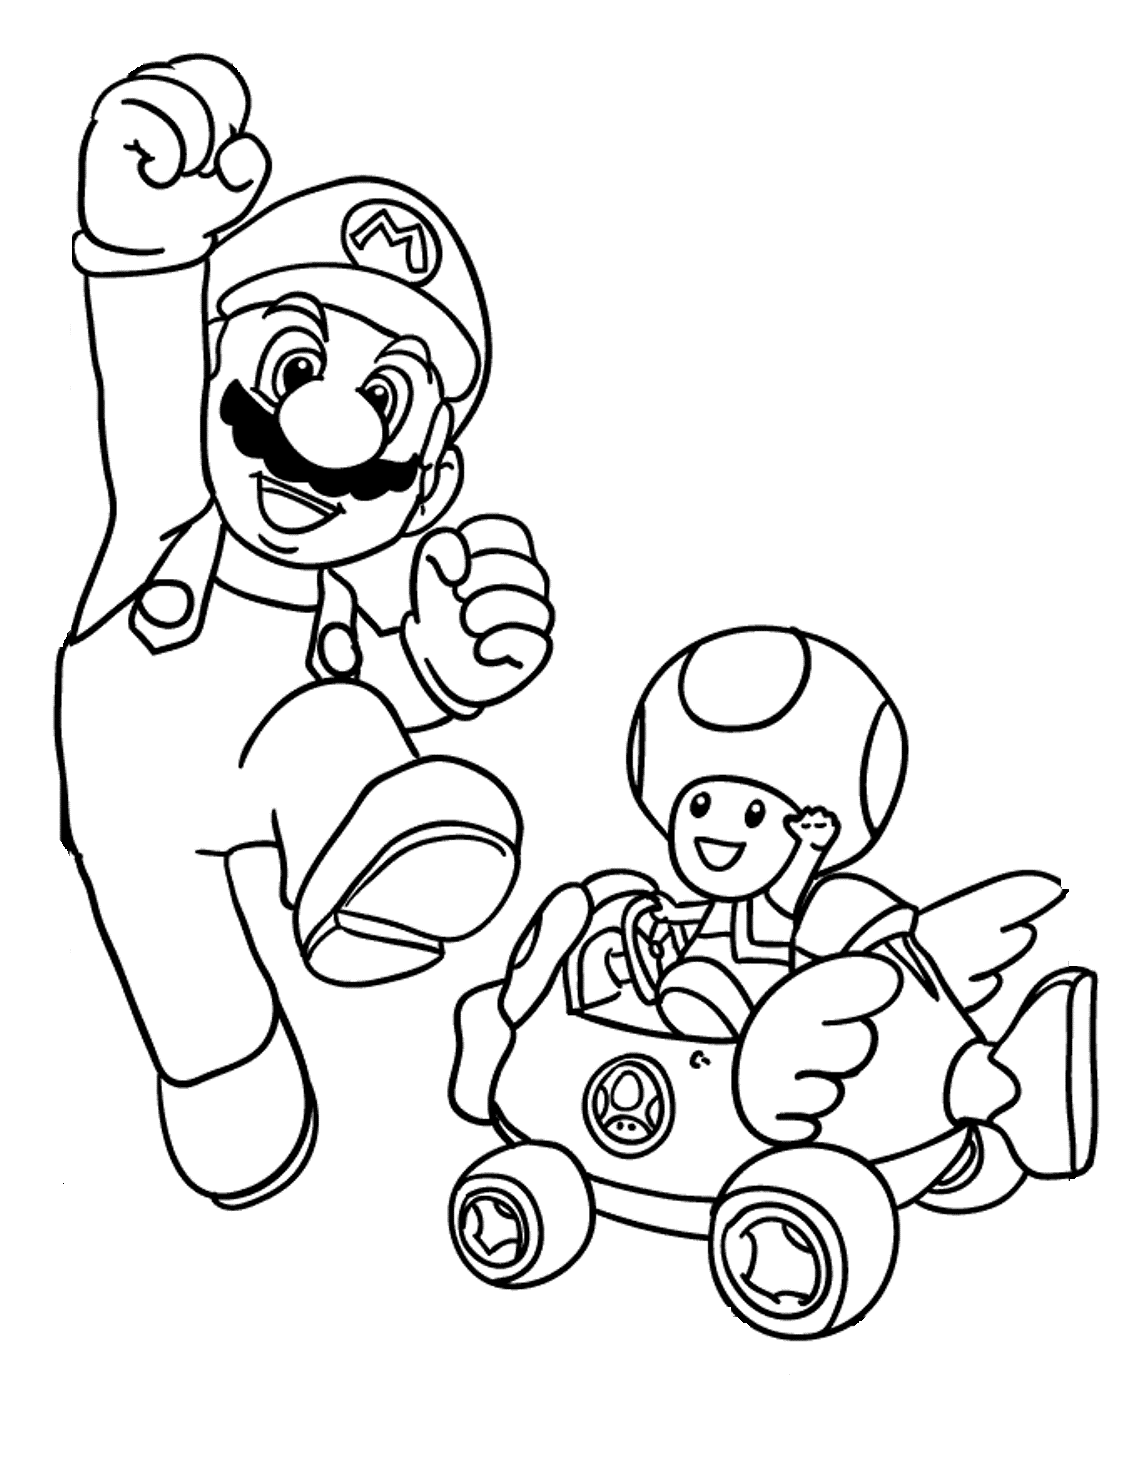 Super Mario Coloring Pages Printable - Printable World Holiday